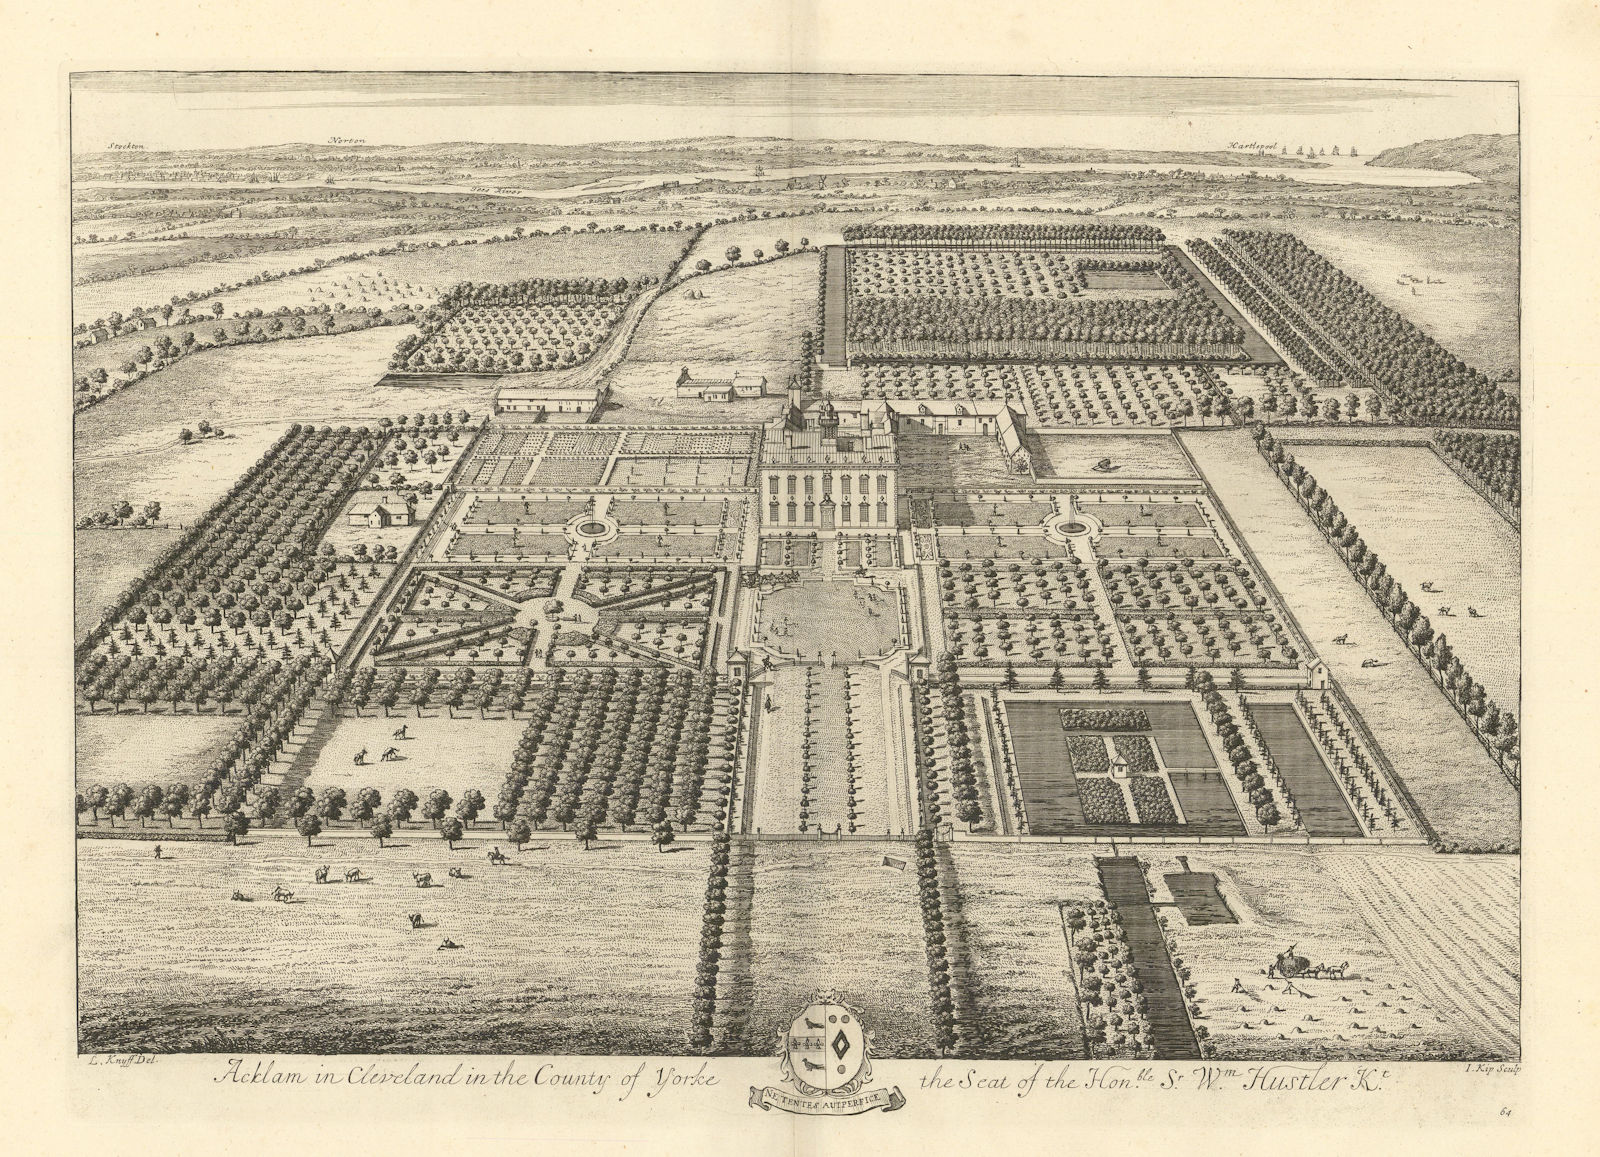 Acklam Hall, Middlesbrough College by Kip & Knyff. "Acklam in Cleveland" 1709